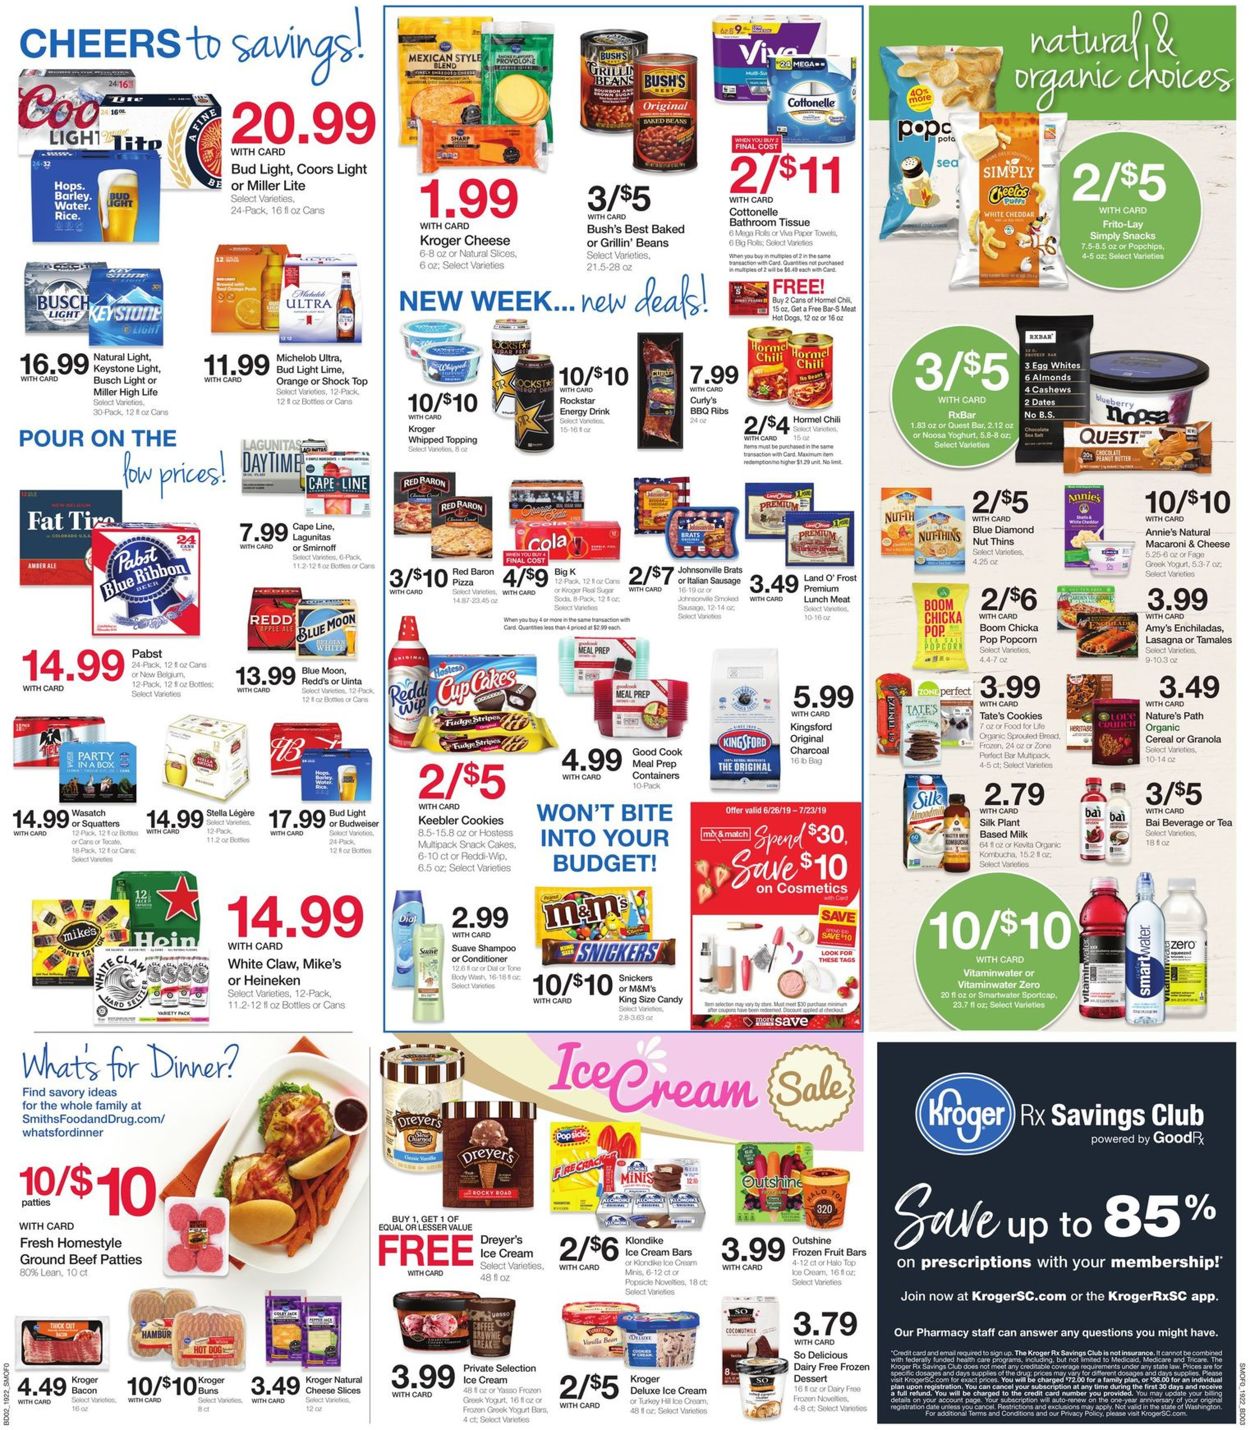 Smith's Current weekly ad 07/03 - 07/09/2019 [4] - frequent-ads.com